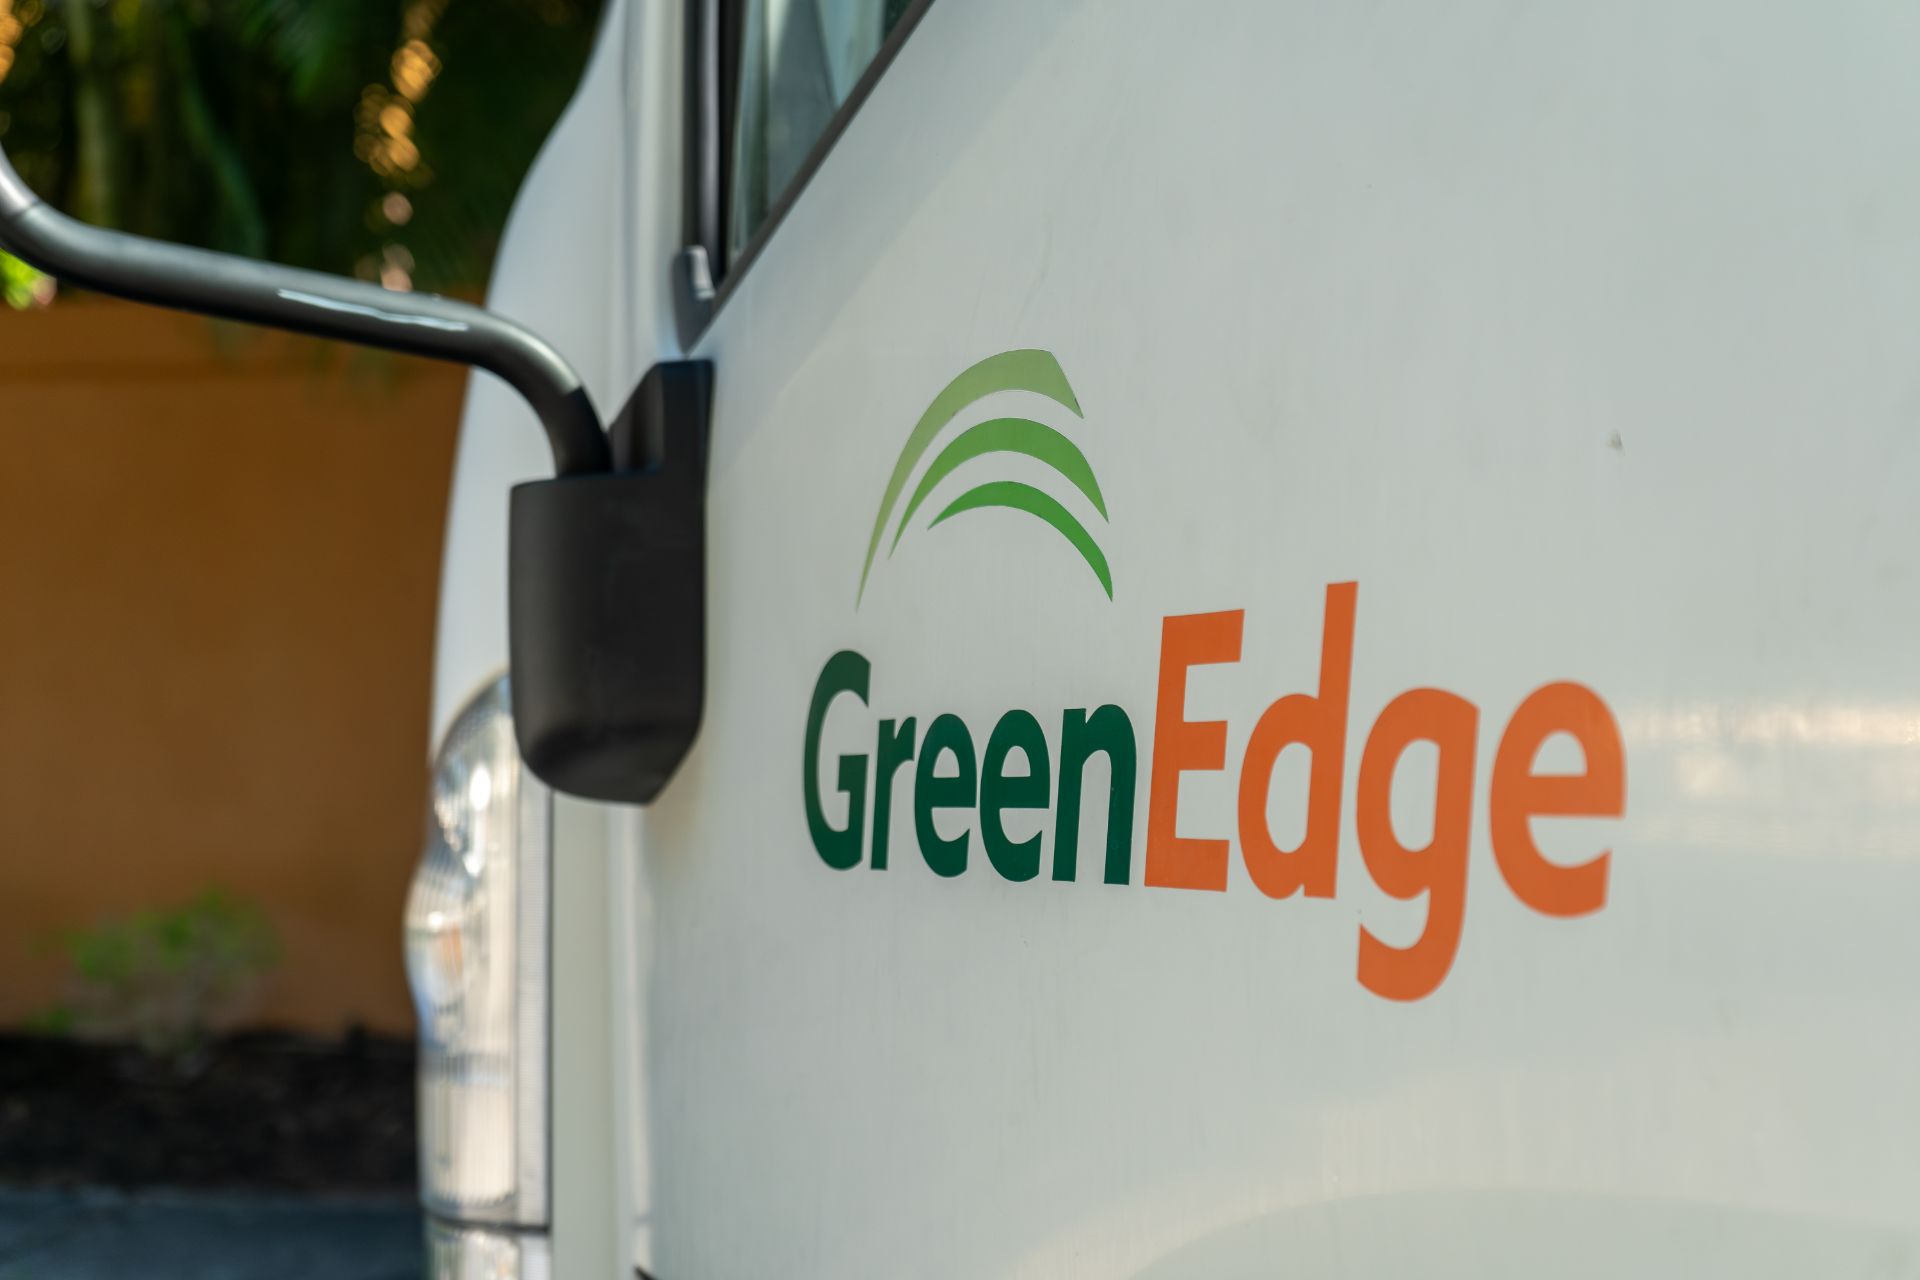 The GreenEdge logo prominently displayed on a company truck in Sarasota. Our logo represents our commitment to providing exceptional landscaping services, showcasing our expertise and dedication to quality. Trust GreenEdge for professional and reliable landscaping solutions that transform your outdoor spaces into stunning environments.